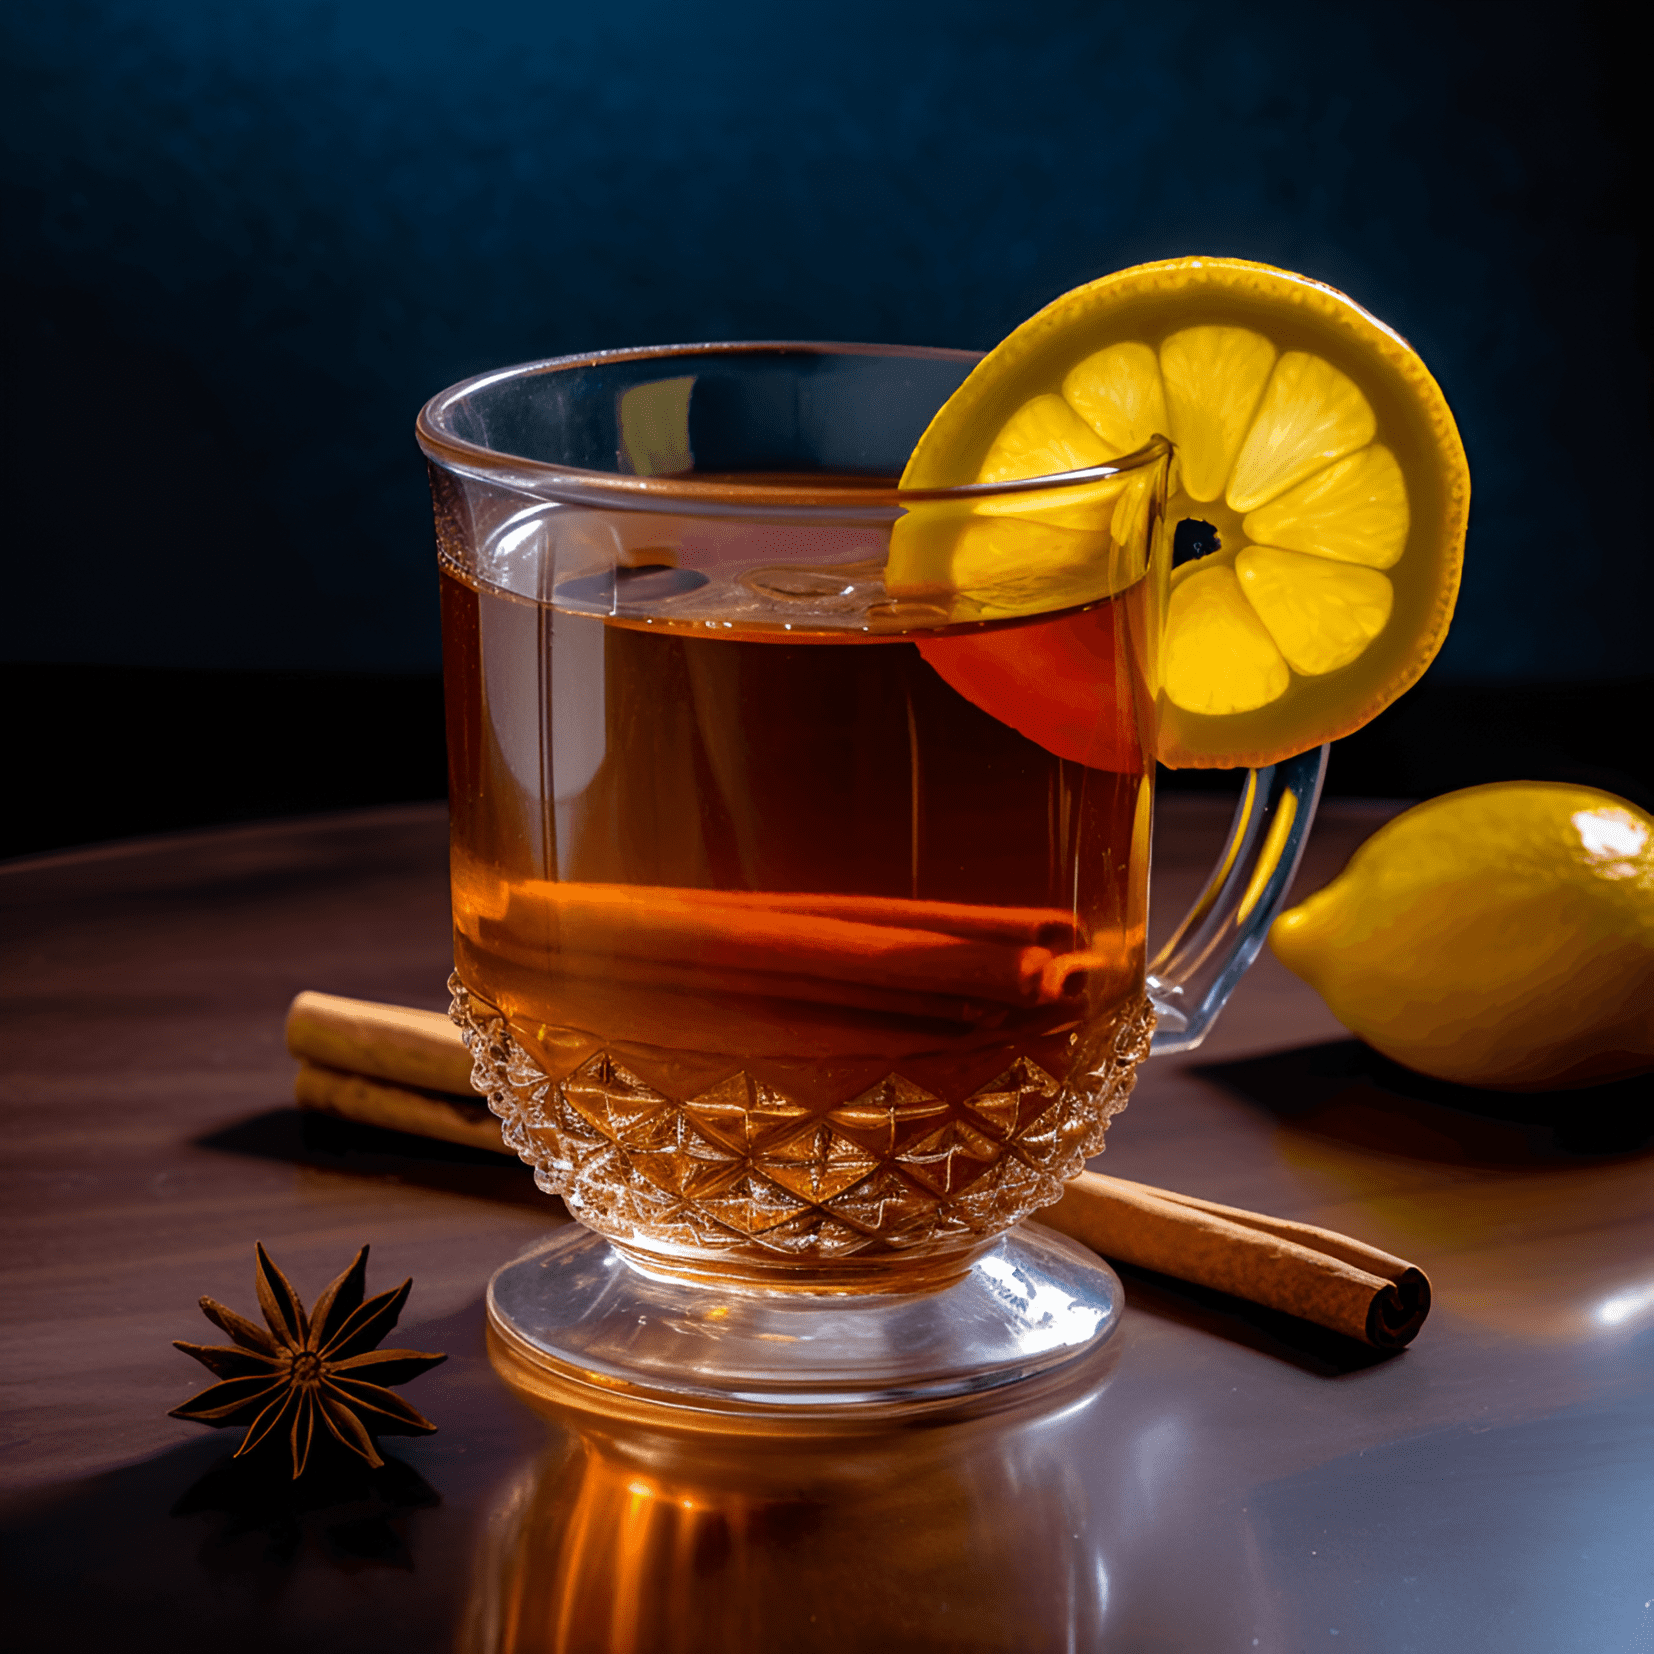 The Gunfire cocktail has a warm, robust, and slightly sweet taste. The strong black tea provides a bold, earthy base, while the rum adds a rich, smooth sweetness. The combination creates a comforting and invigorating drink.